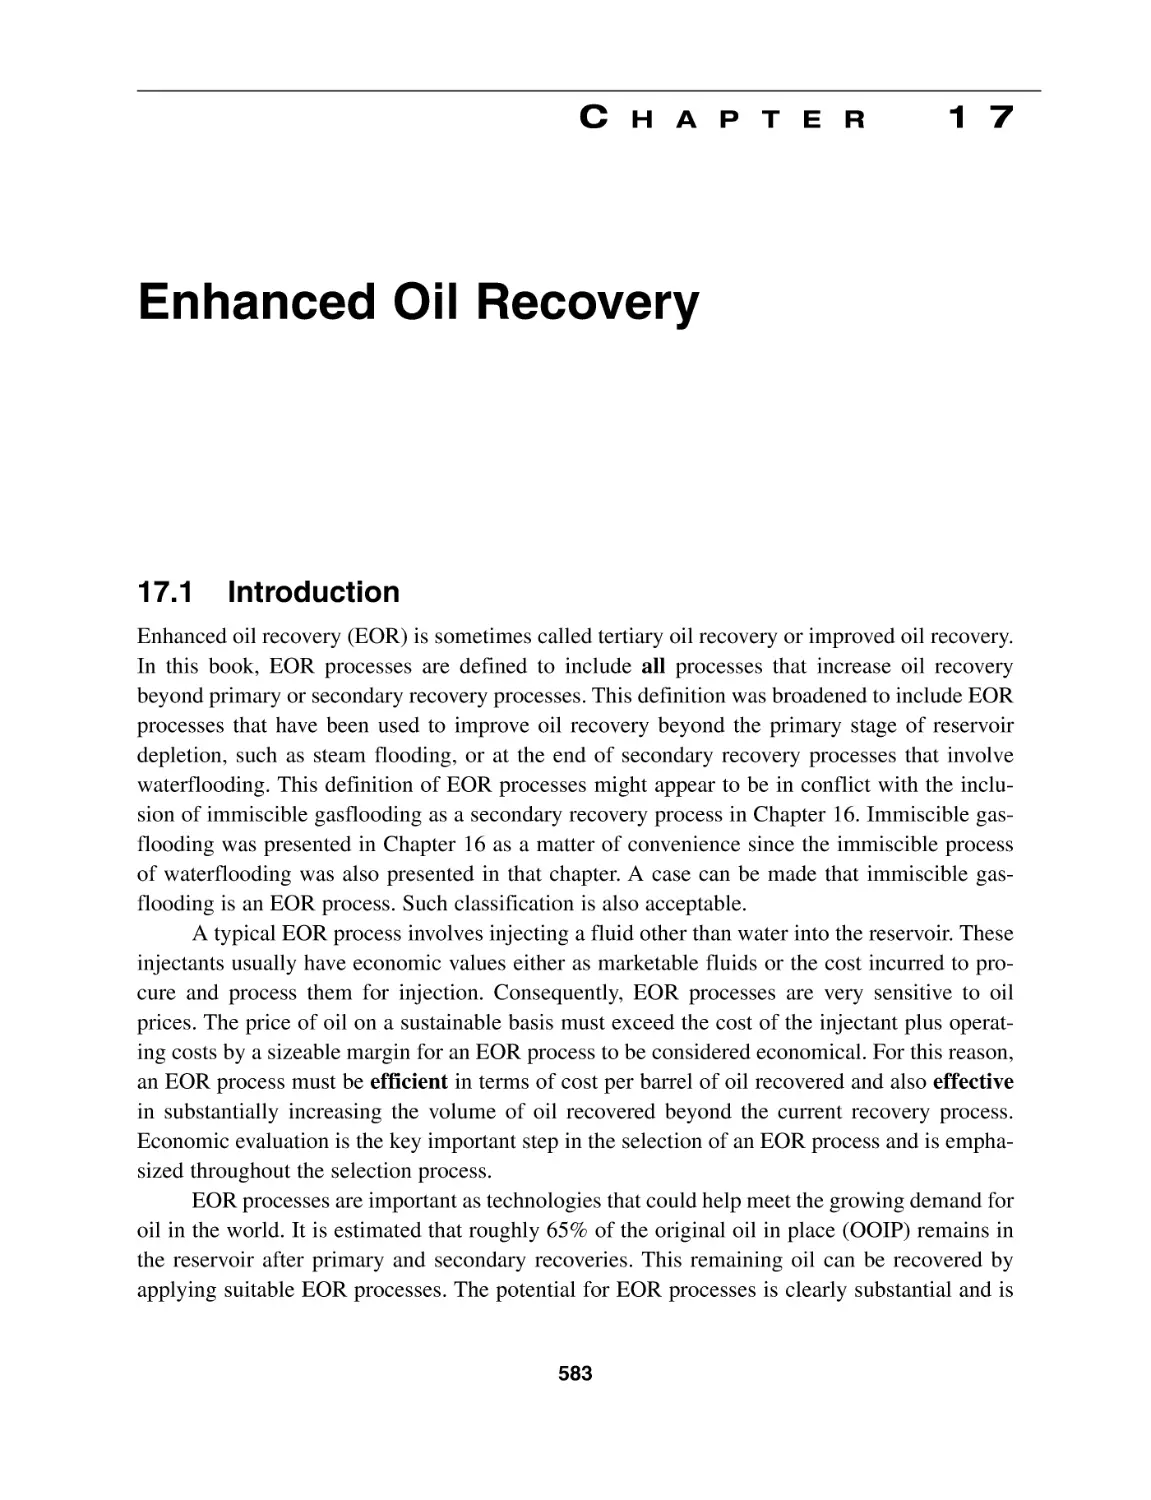 Chapter 17 Enhanced Oil Recovery
17.1 Introduction